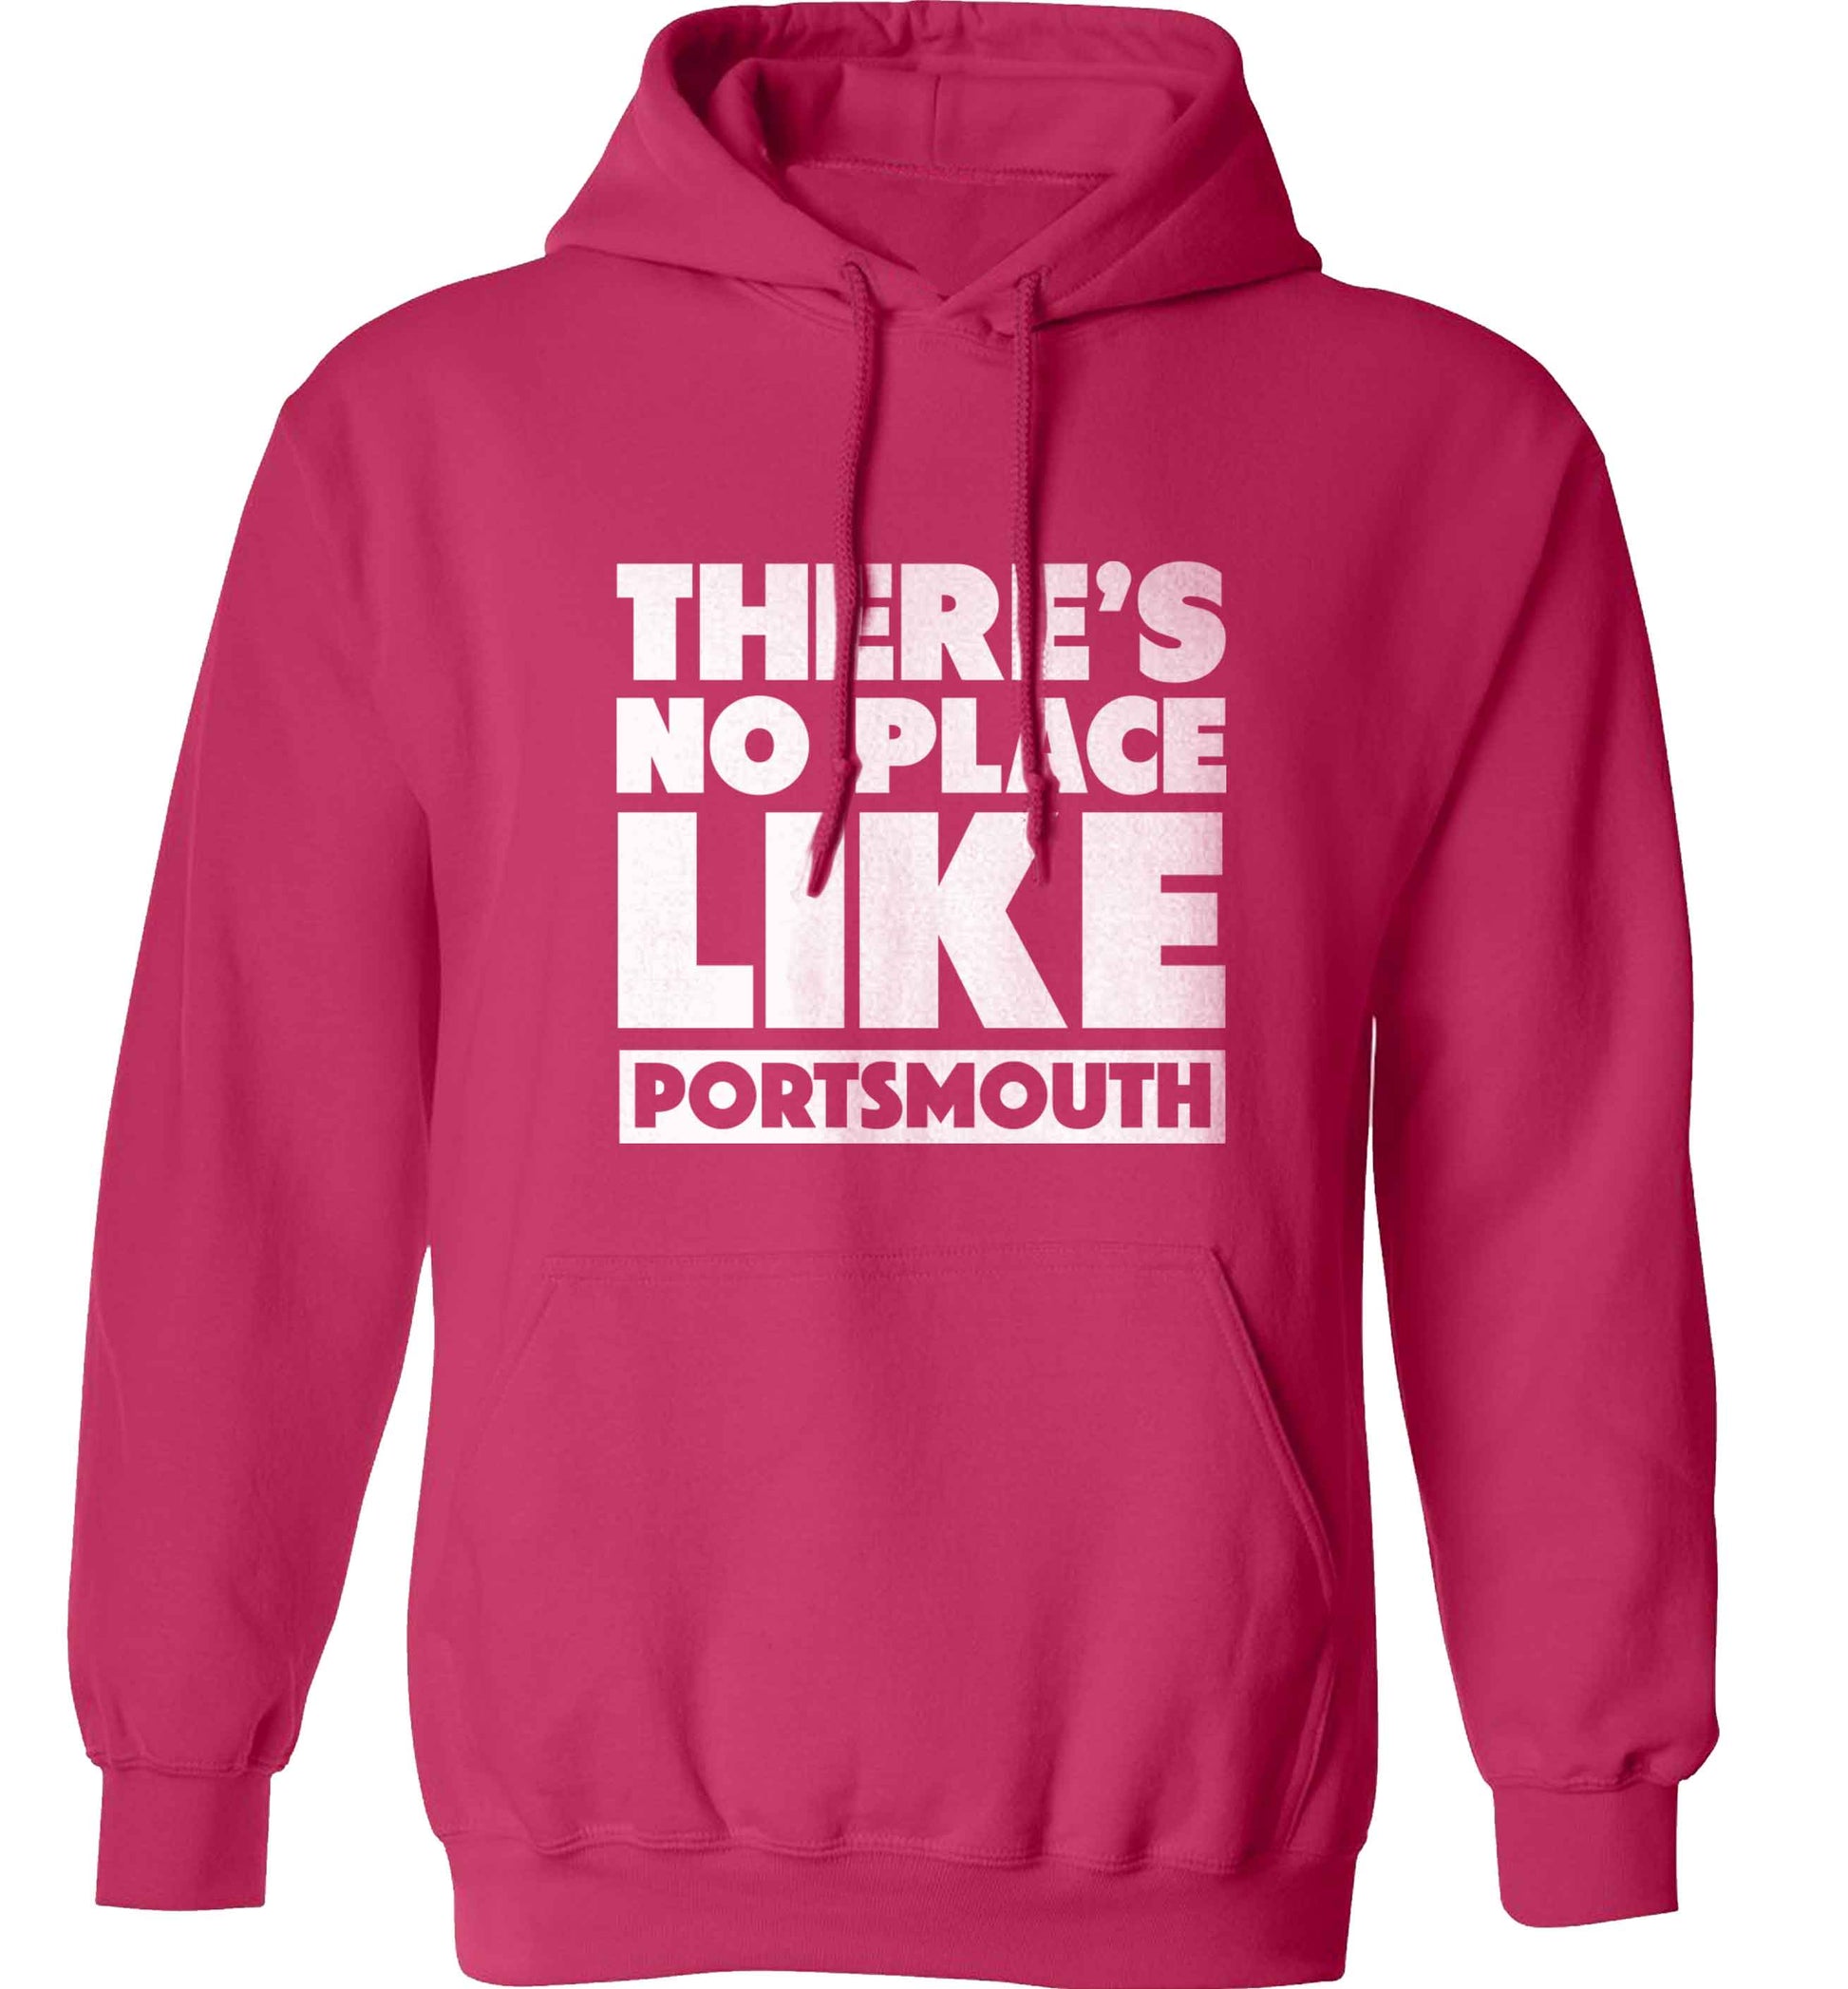 There's no place like Porstmouth adults unisex pink hoodie 2XL